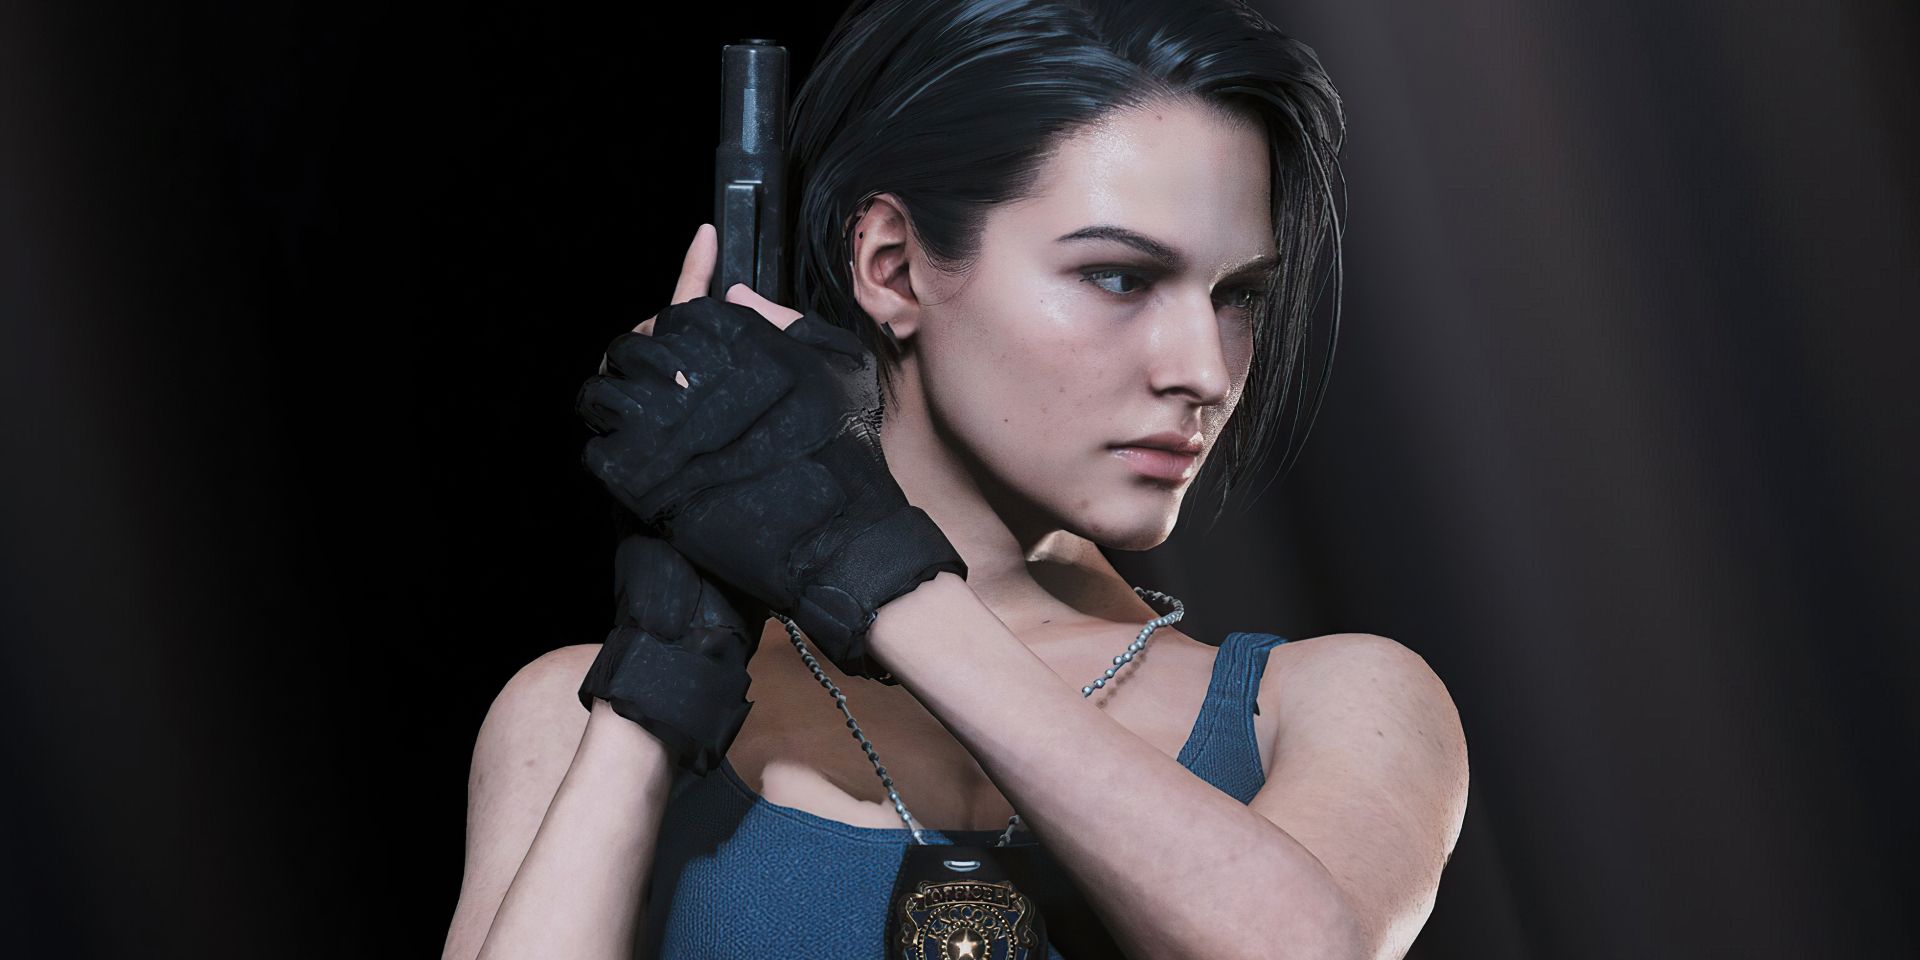 Jill Valentine from the Resident Evil 3 video game remake.